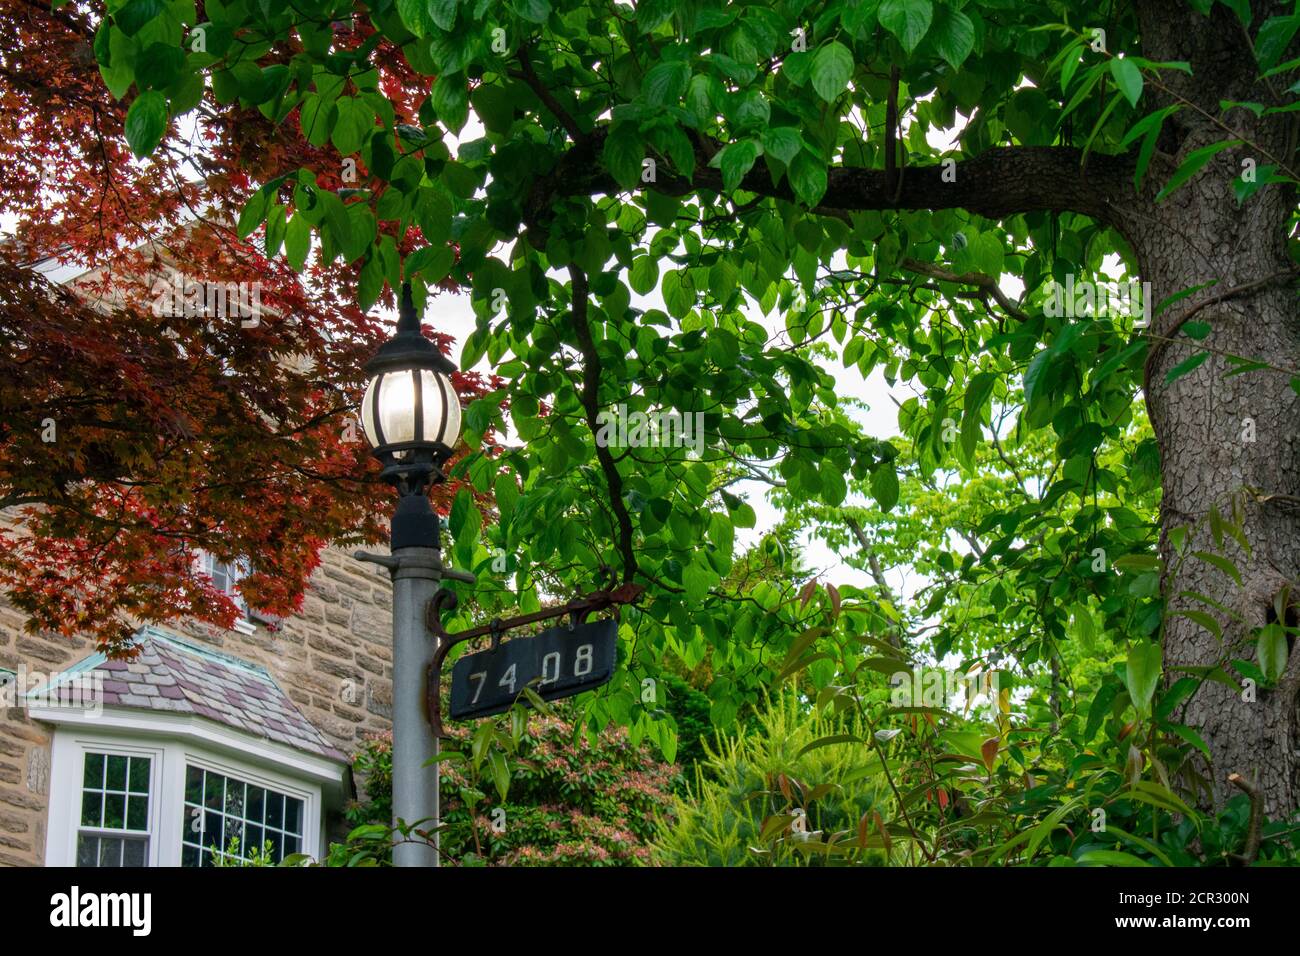 An Old Fashioned Black Metal Light Post Turned on Surrounded by Trees and Foliage Stock Photo